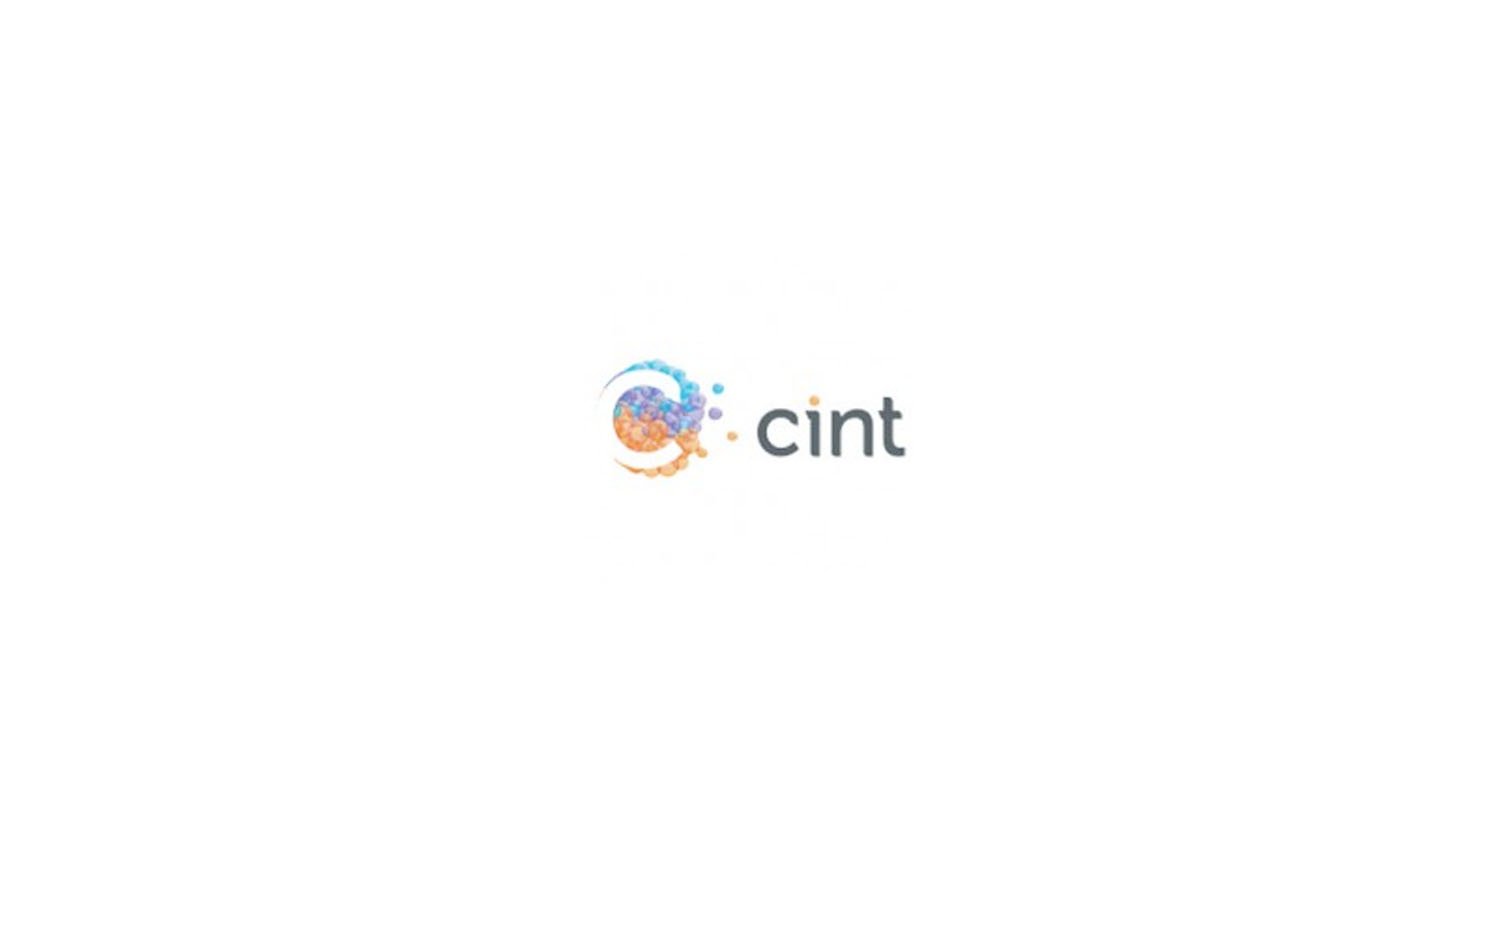 Lumi partners with Cint to build the world’s largest, mobile-first panel